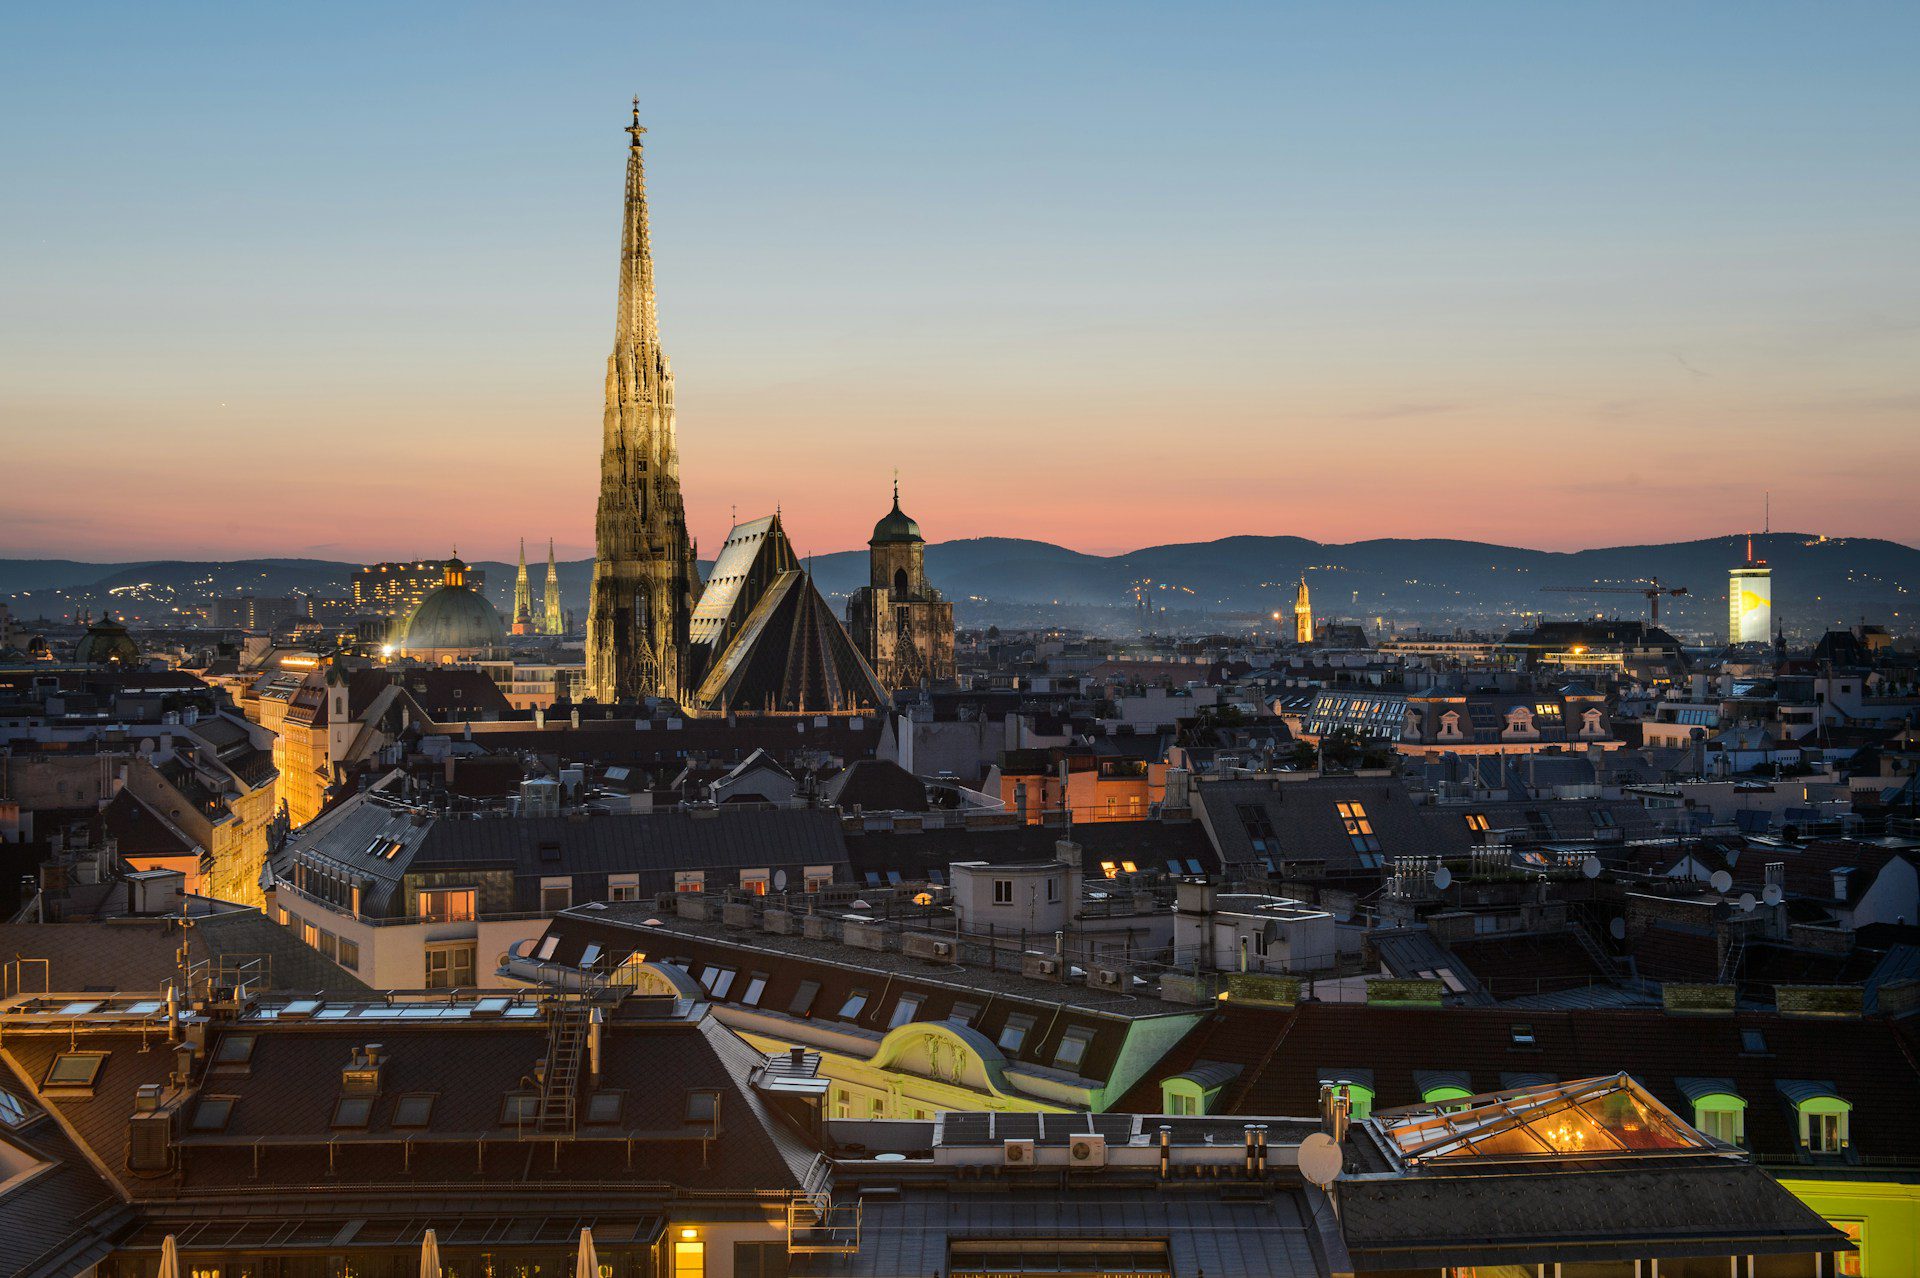 View of Vienna city's skyline at sunset, showing rooftops a large spire.